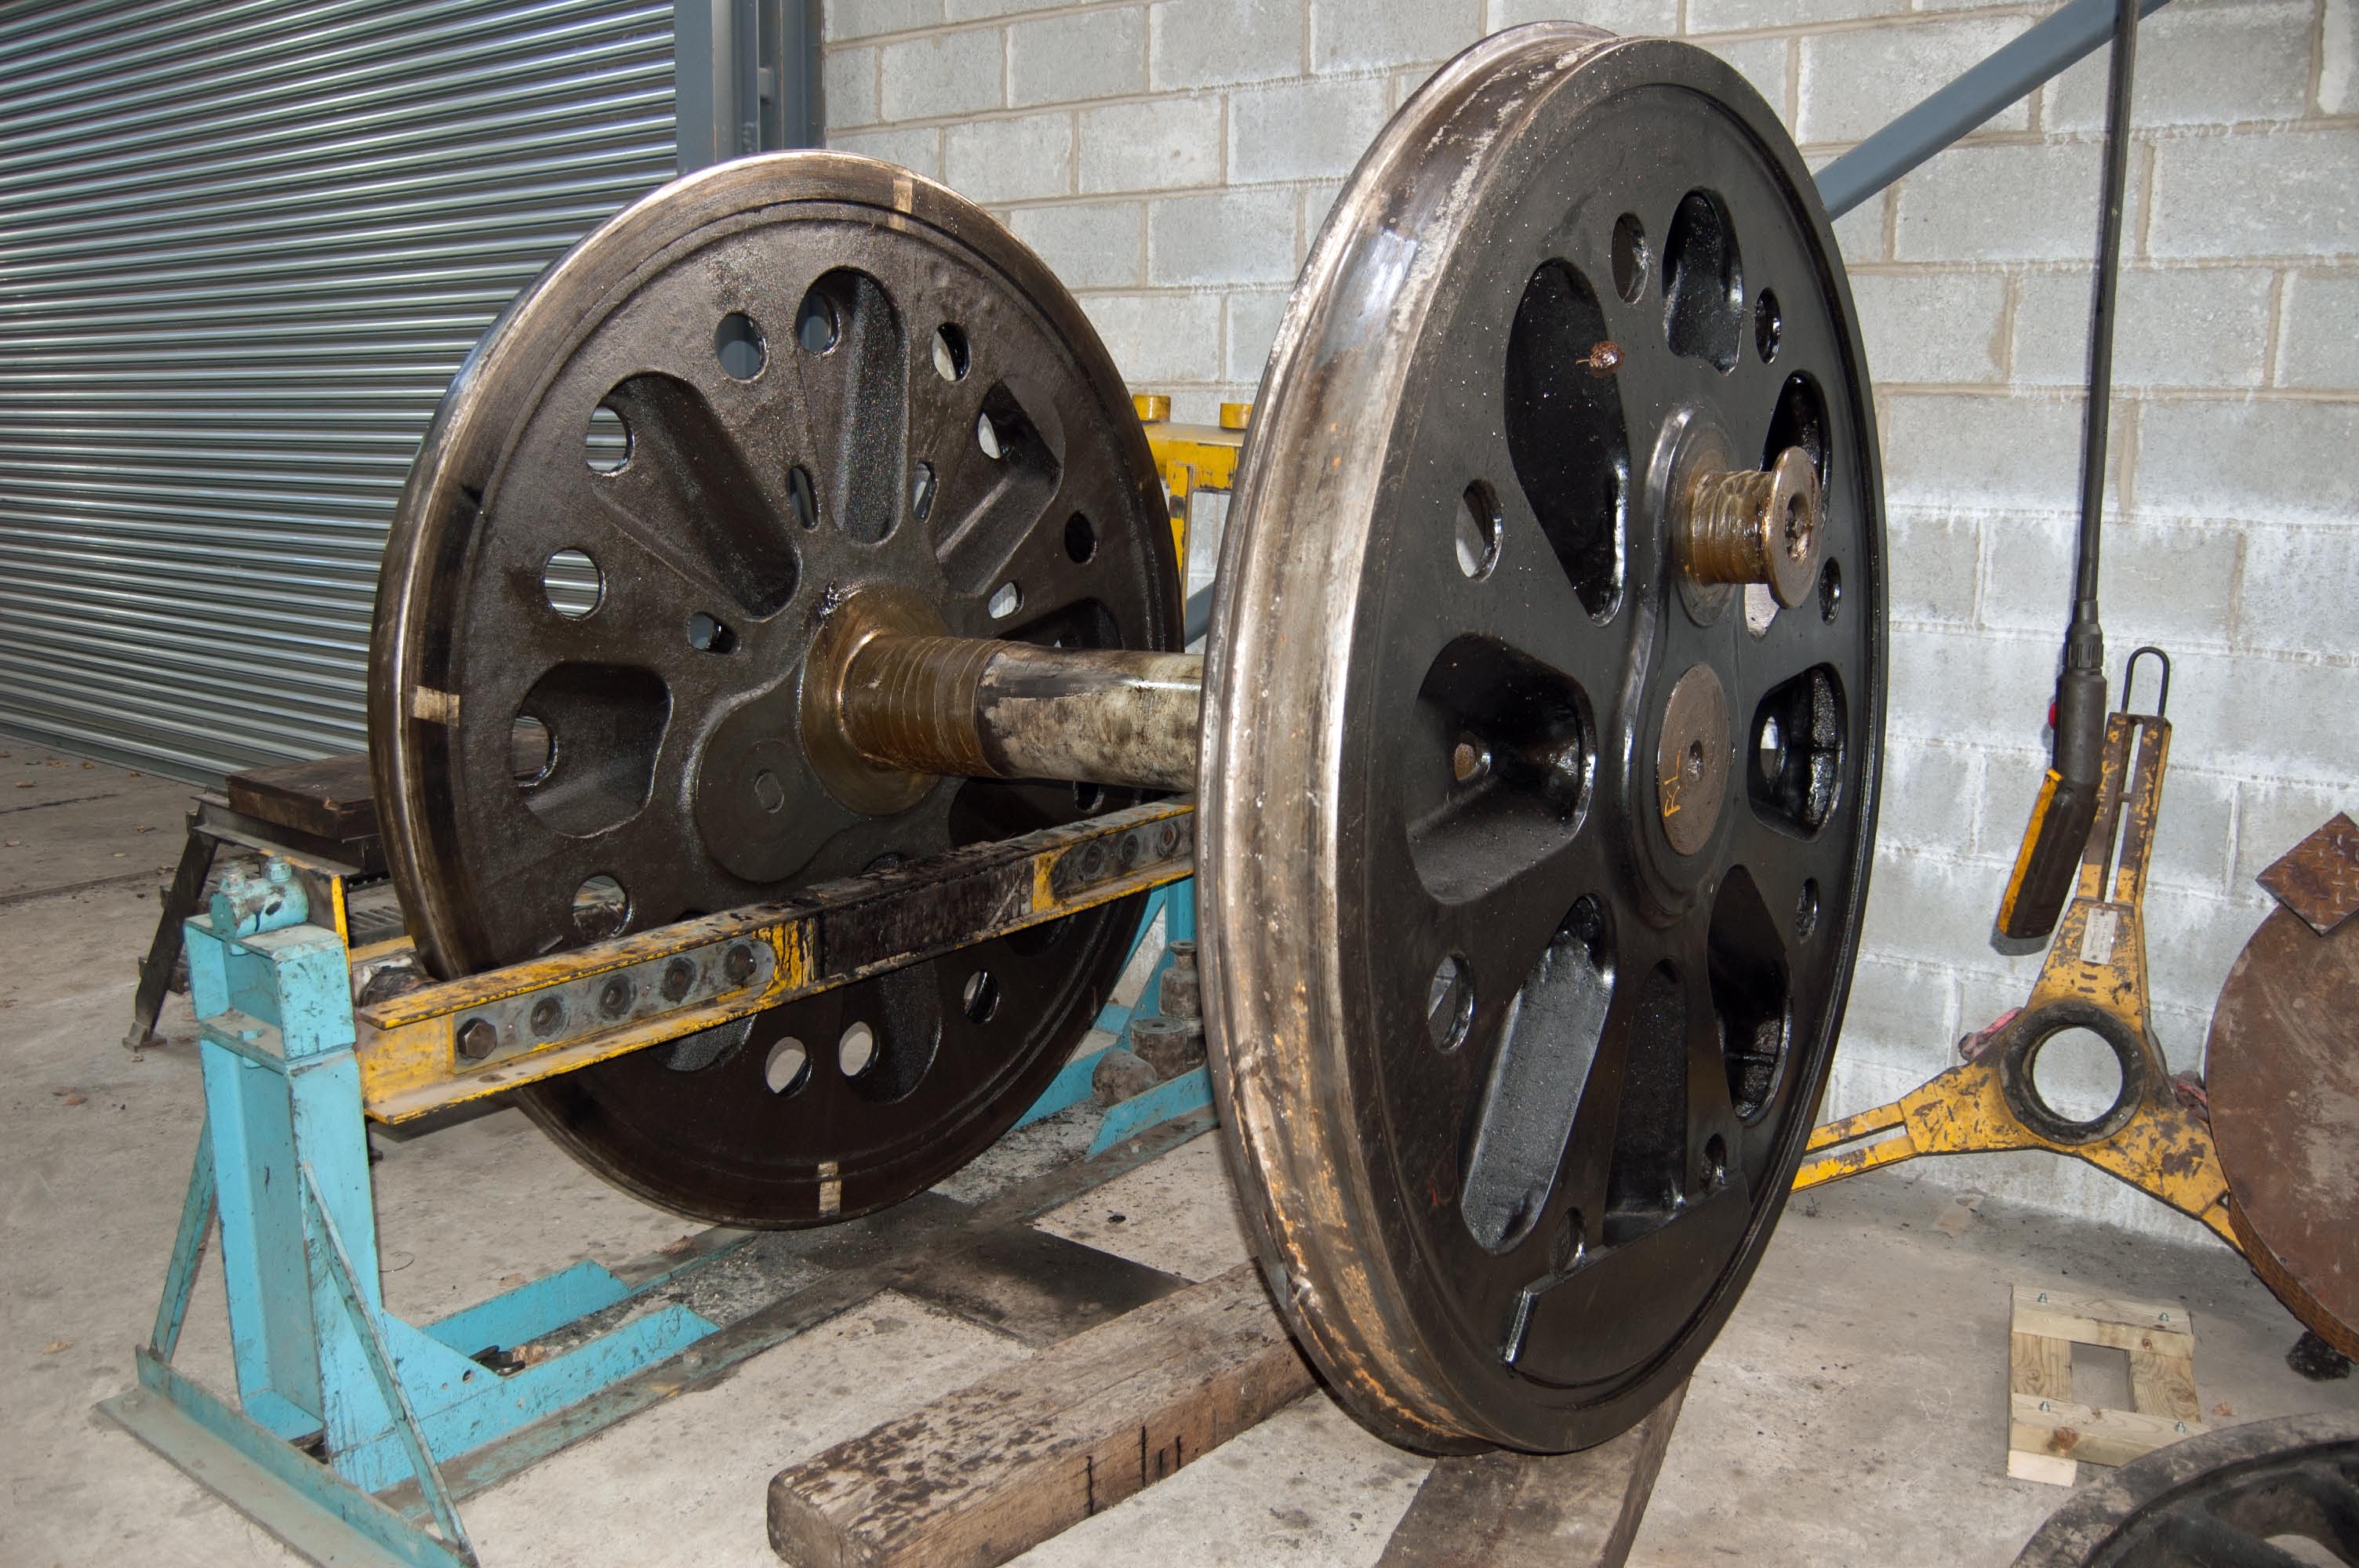 The first wheelset is prepared for the removal of the old tyres